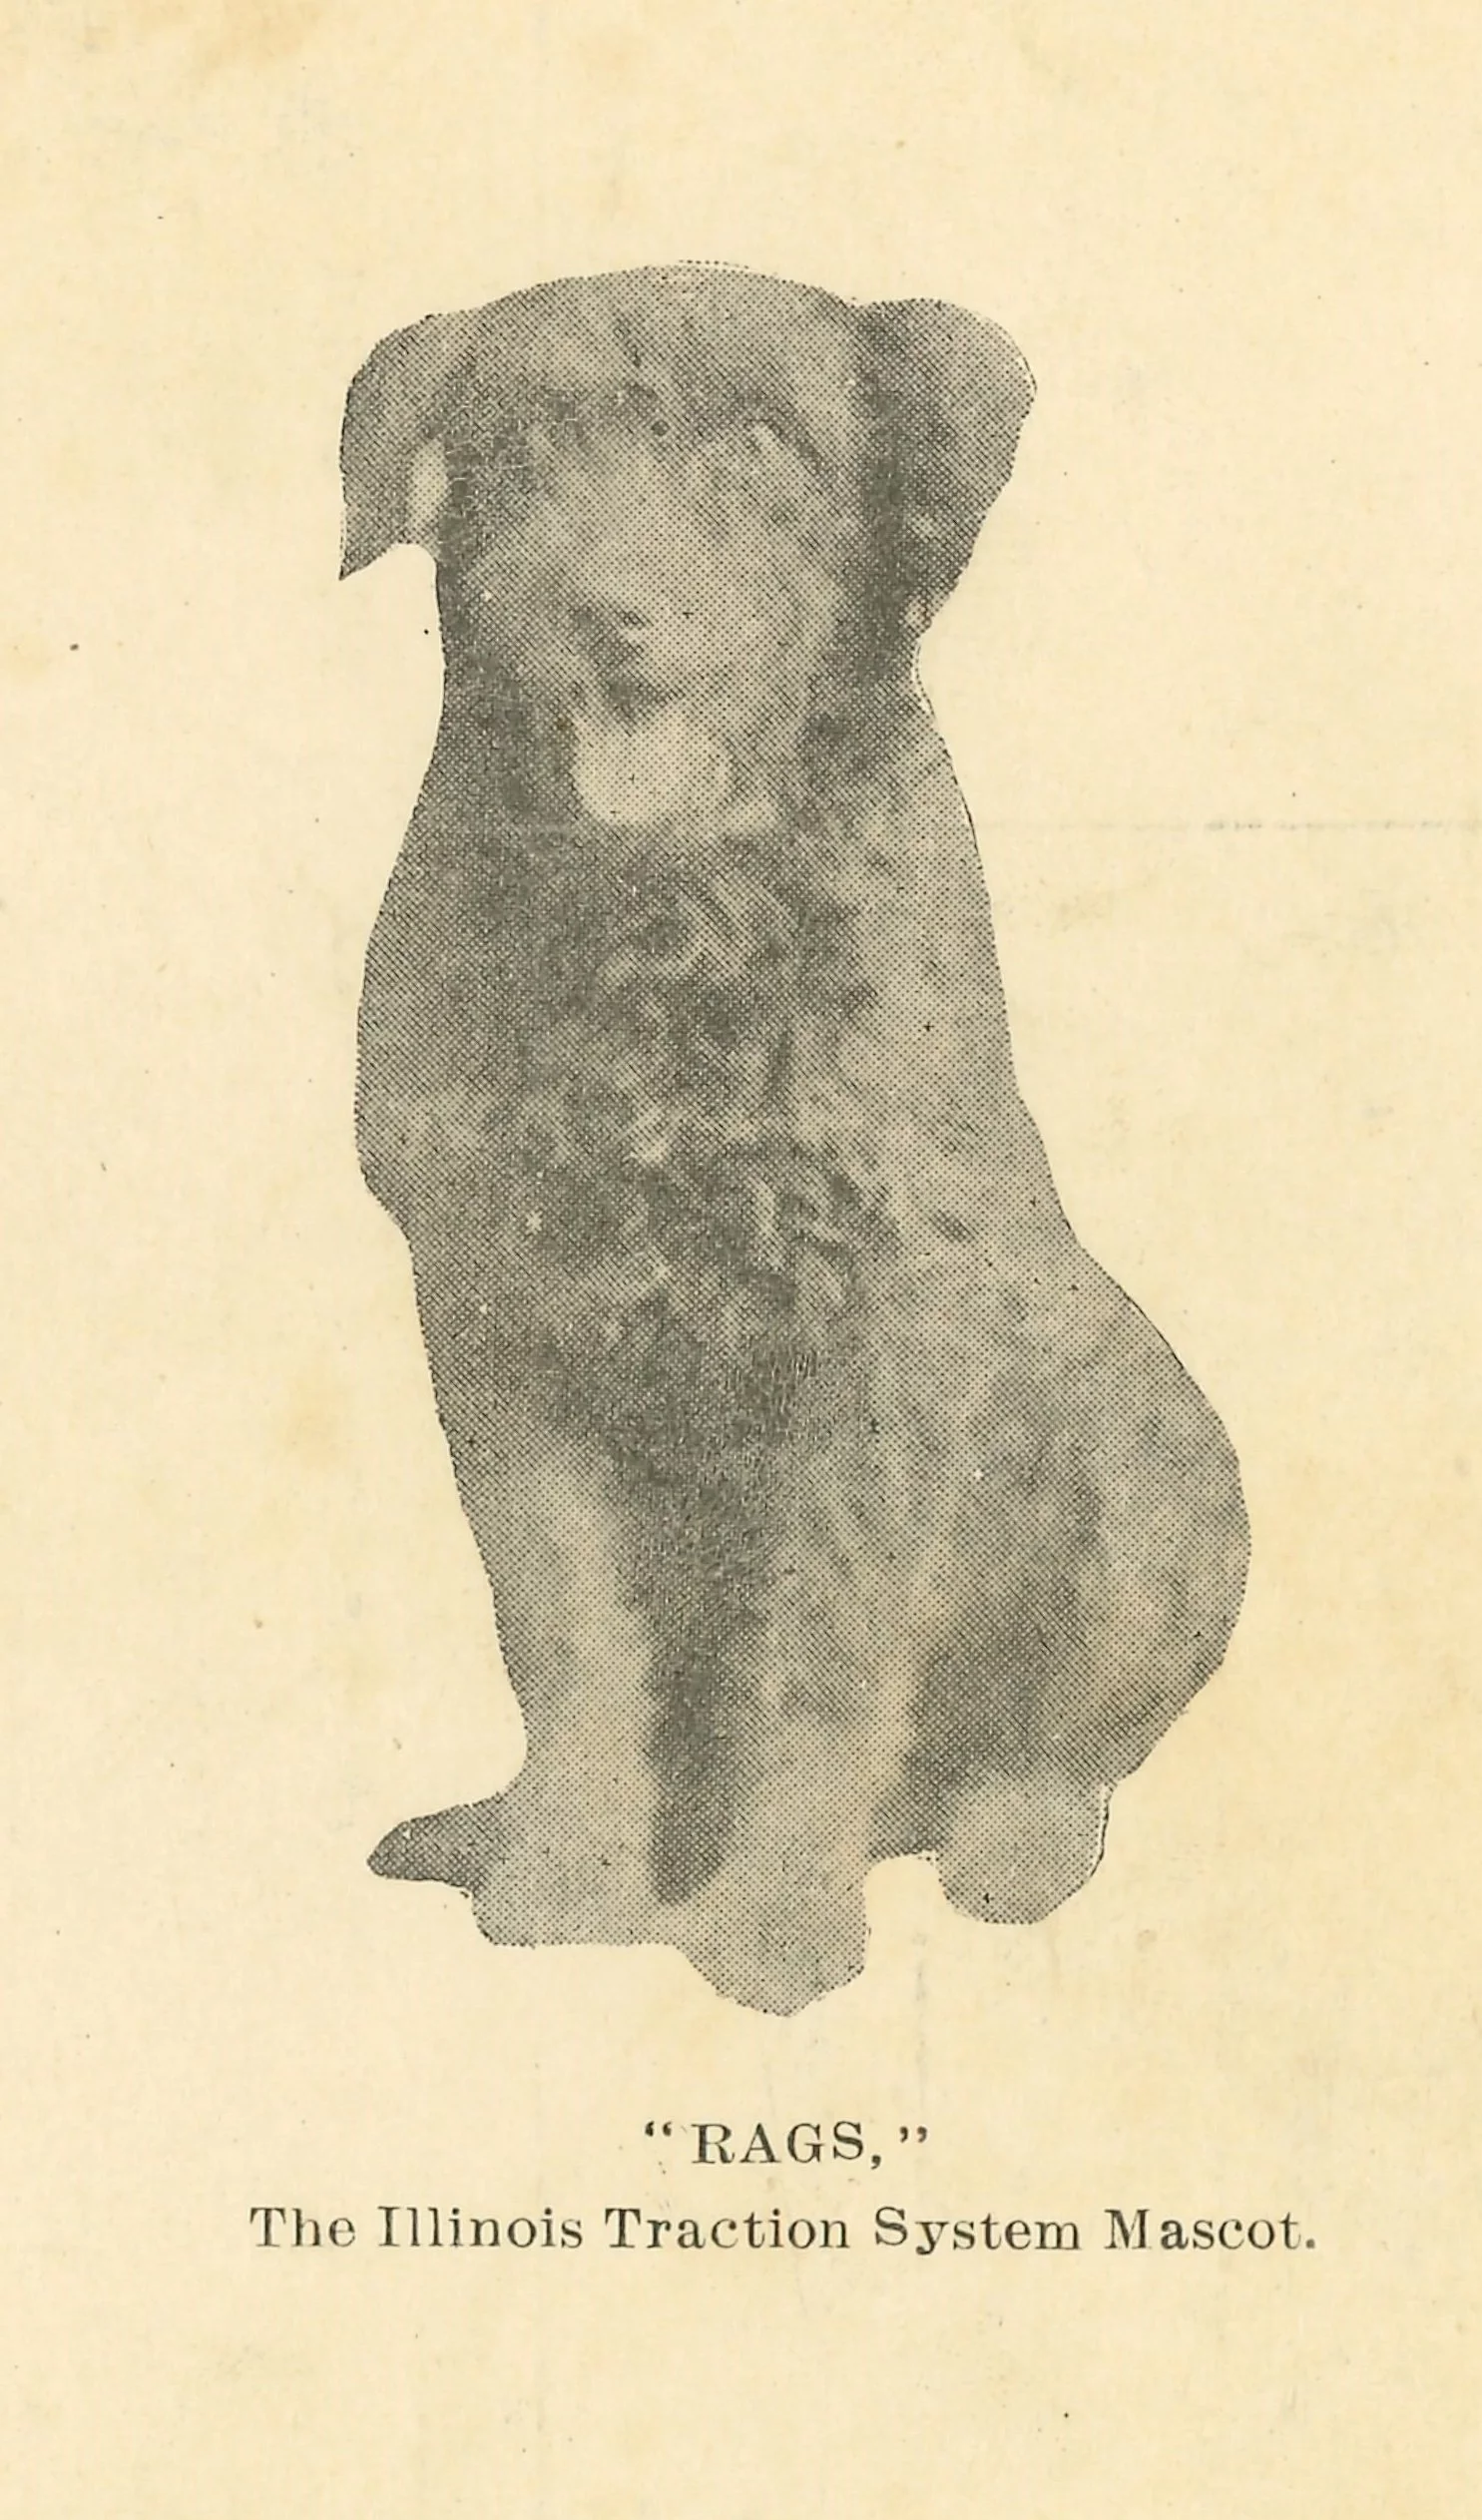 a yellow paper and faded print shows a dog with his mouth open, tongue hanging out. He has dark fur that is wavy, thick all the way down to his furry paws. He has floppy ears. He has four legs in this image. Below the image of the dog it says 